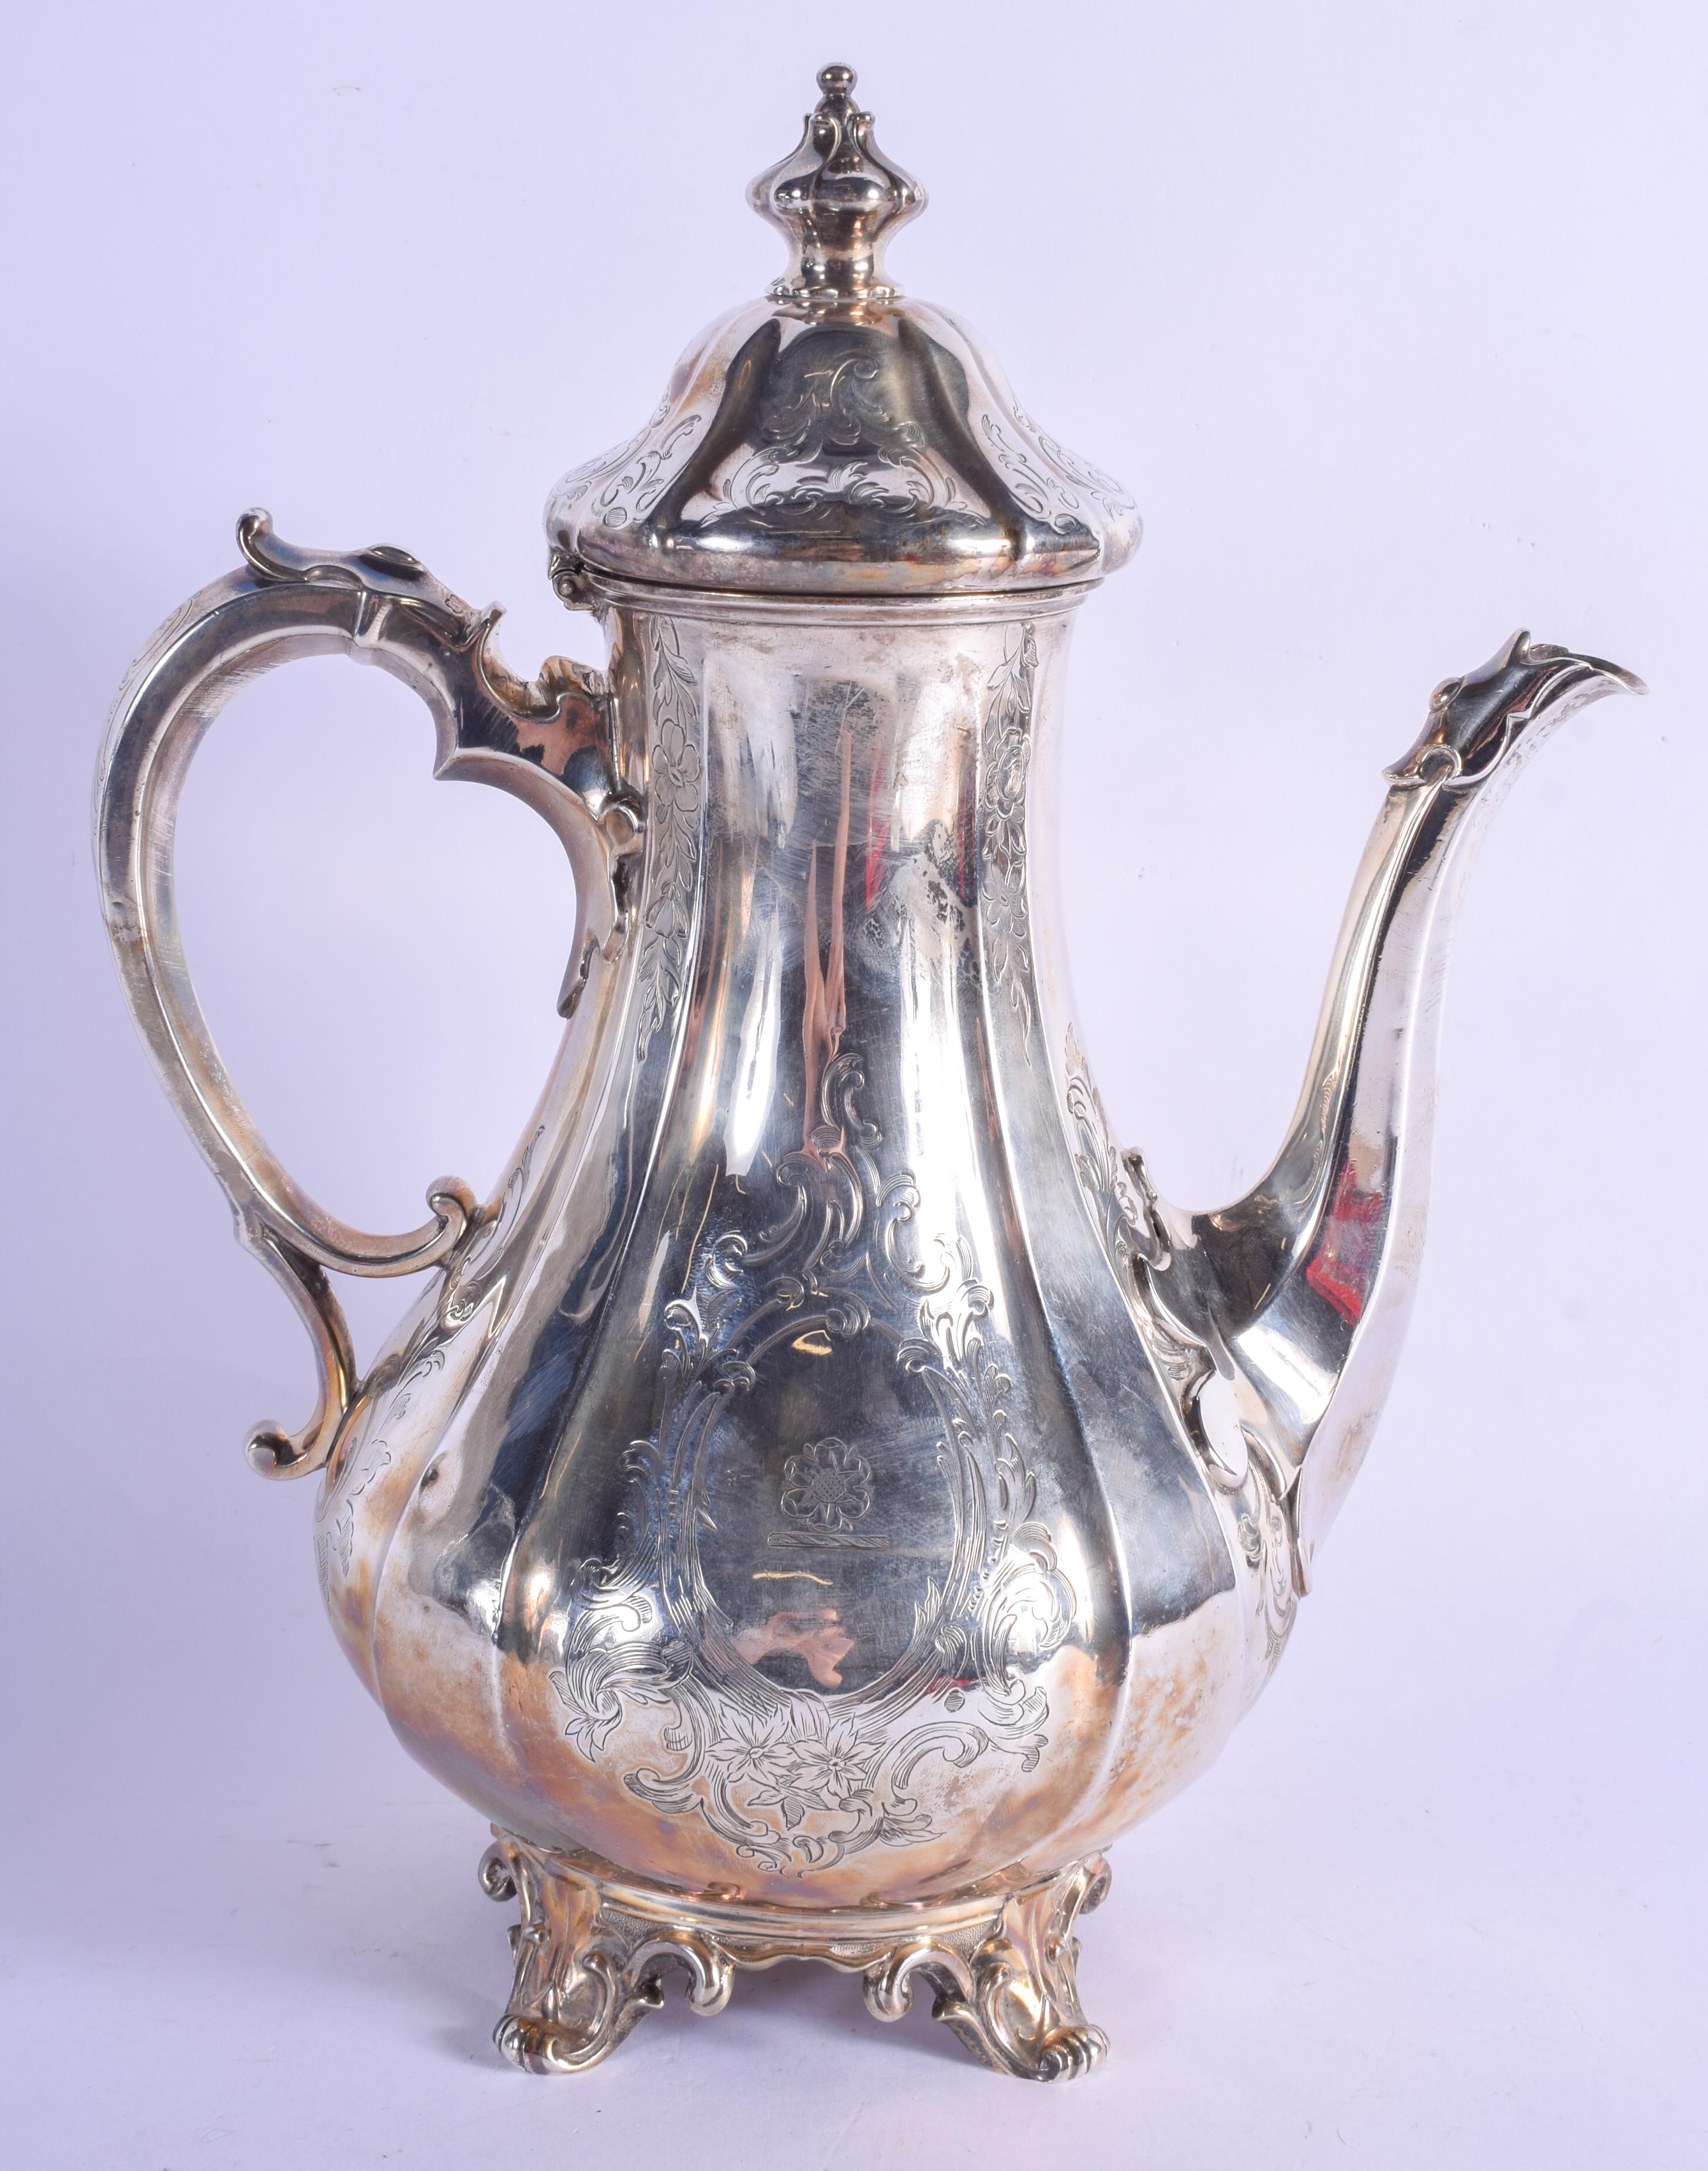 A LARGE EARLY VICTORIAN COFFEE POT. London 1848. 814 grams. 30 cm high. - Image 2 of 7